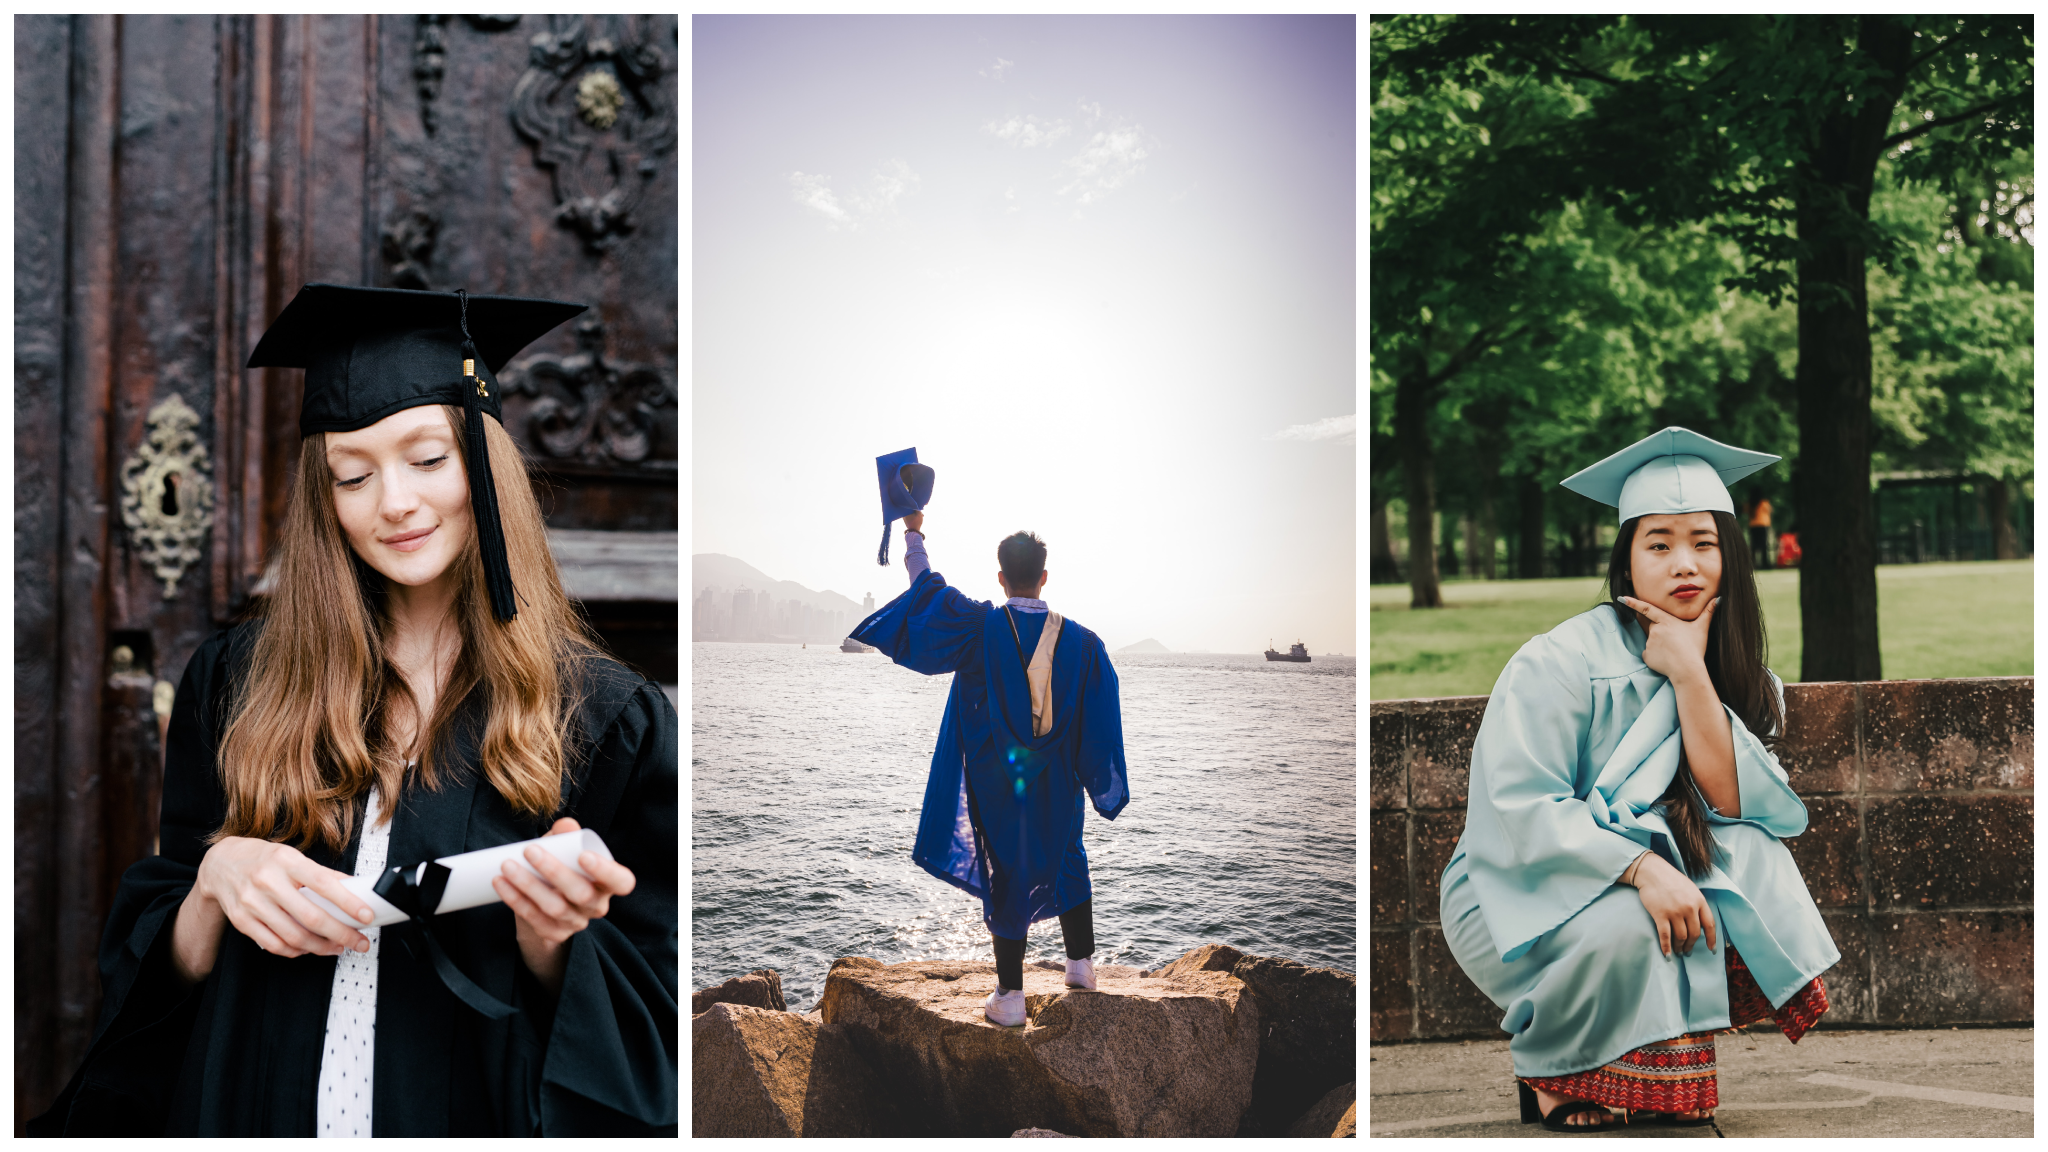 10 Tips and Ideas for Graduation Photos in 2022